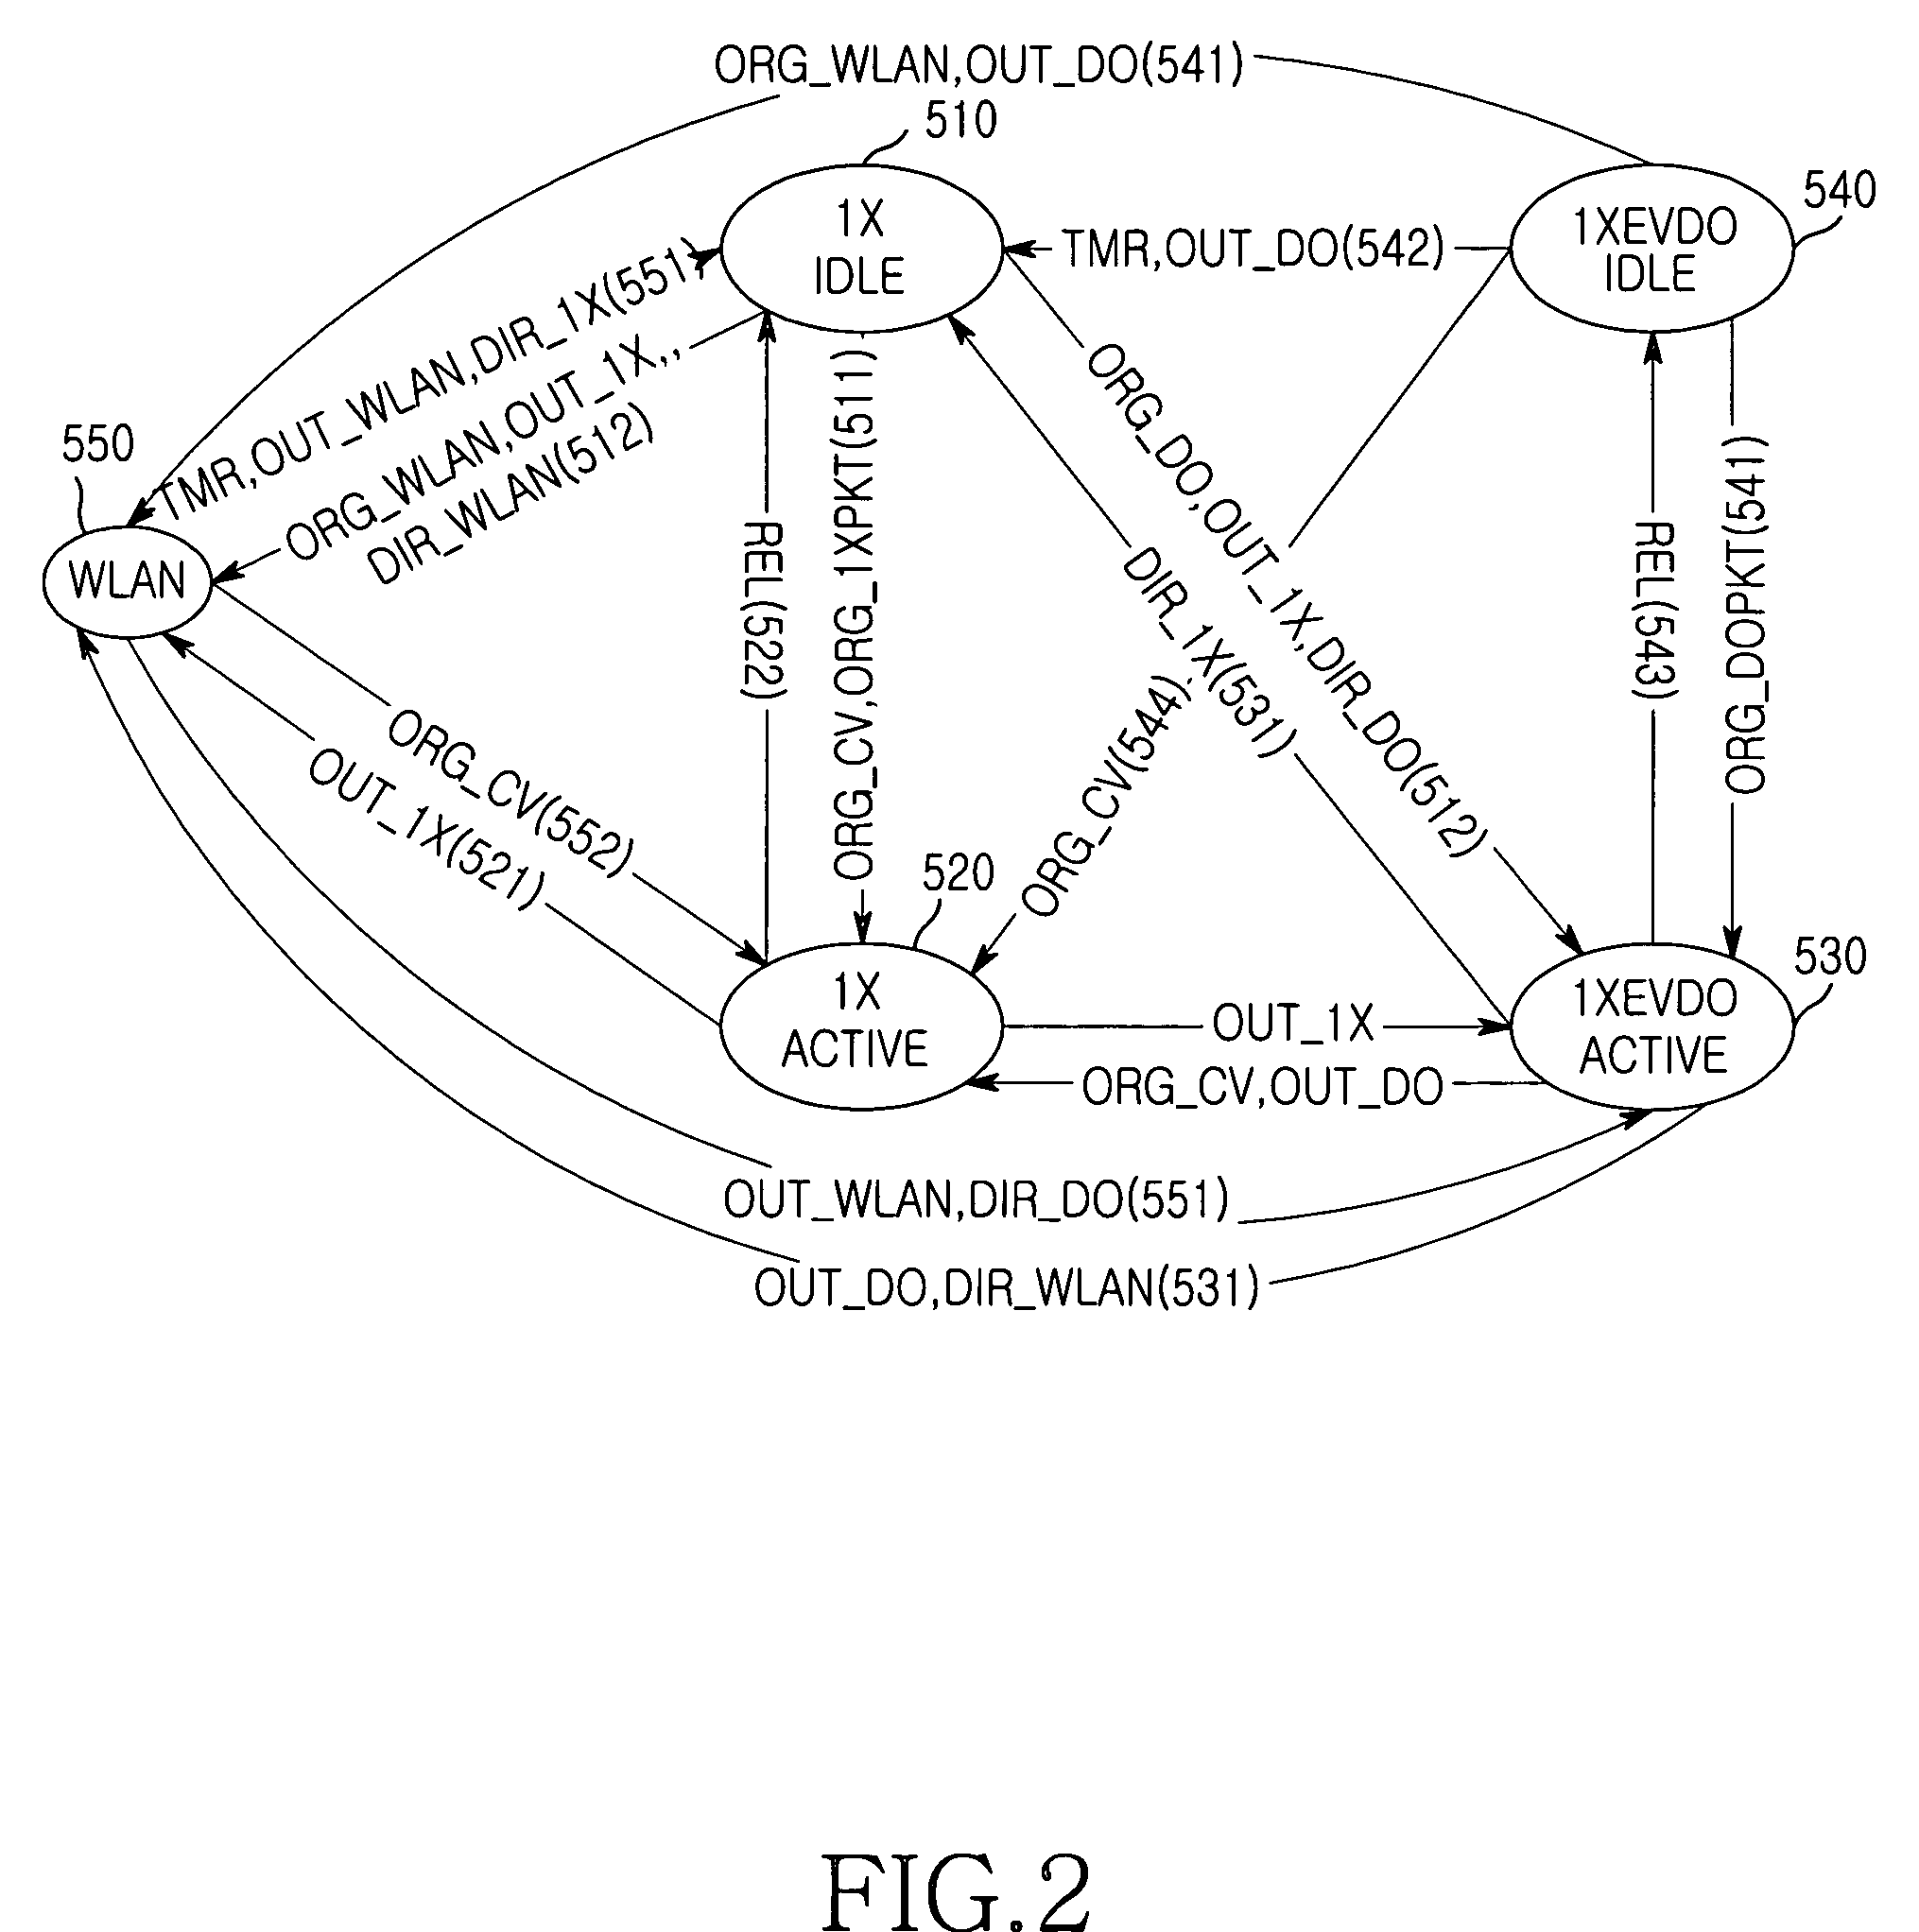 Method and apparatus for providing voice and data services in a mobile communication system with various overlapped access networks